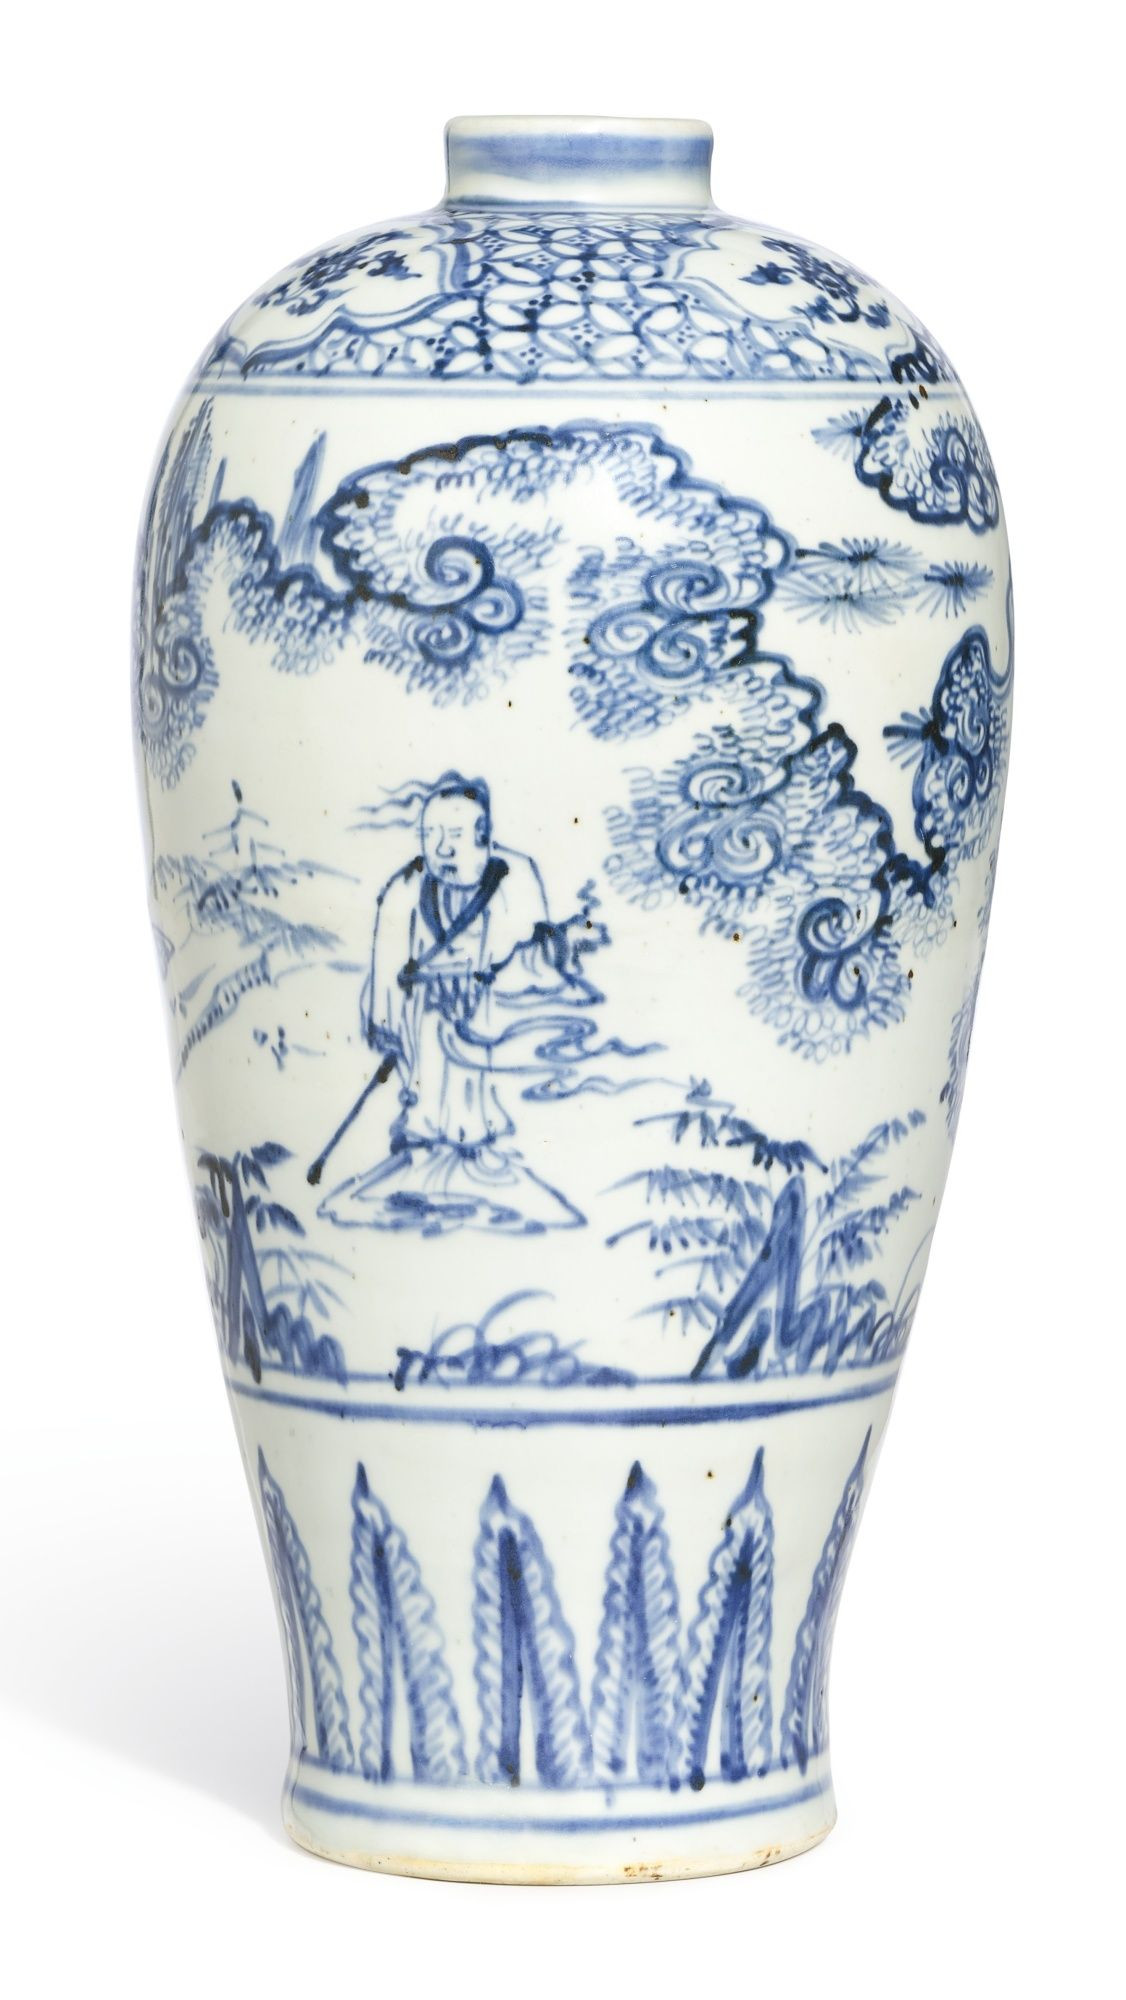 30 Amazing Cobalt Blue Pottery Vase 2024 free download cobalt blue pottery vase of a blue and white figure meipingming dynasty 15th century within a blue and white figure meipingming dynasty 15th century